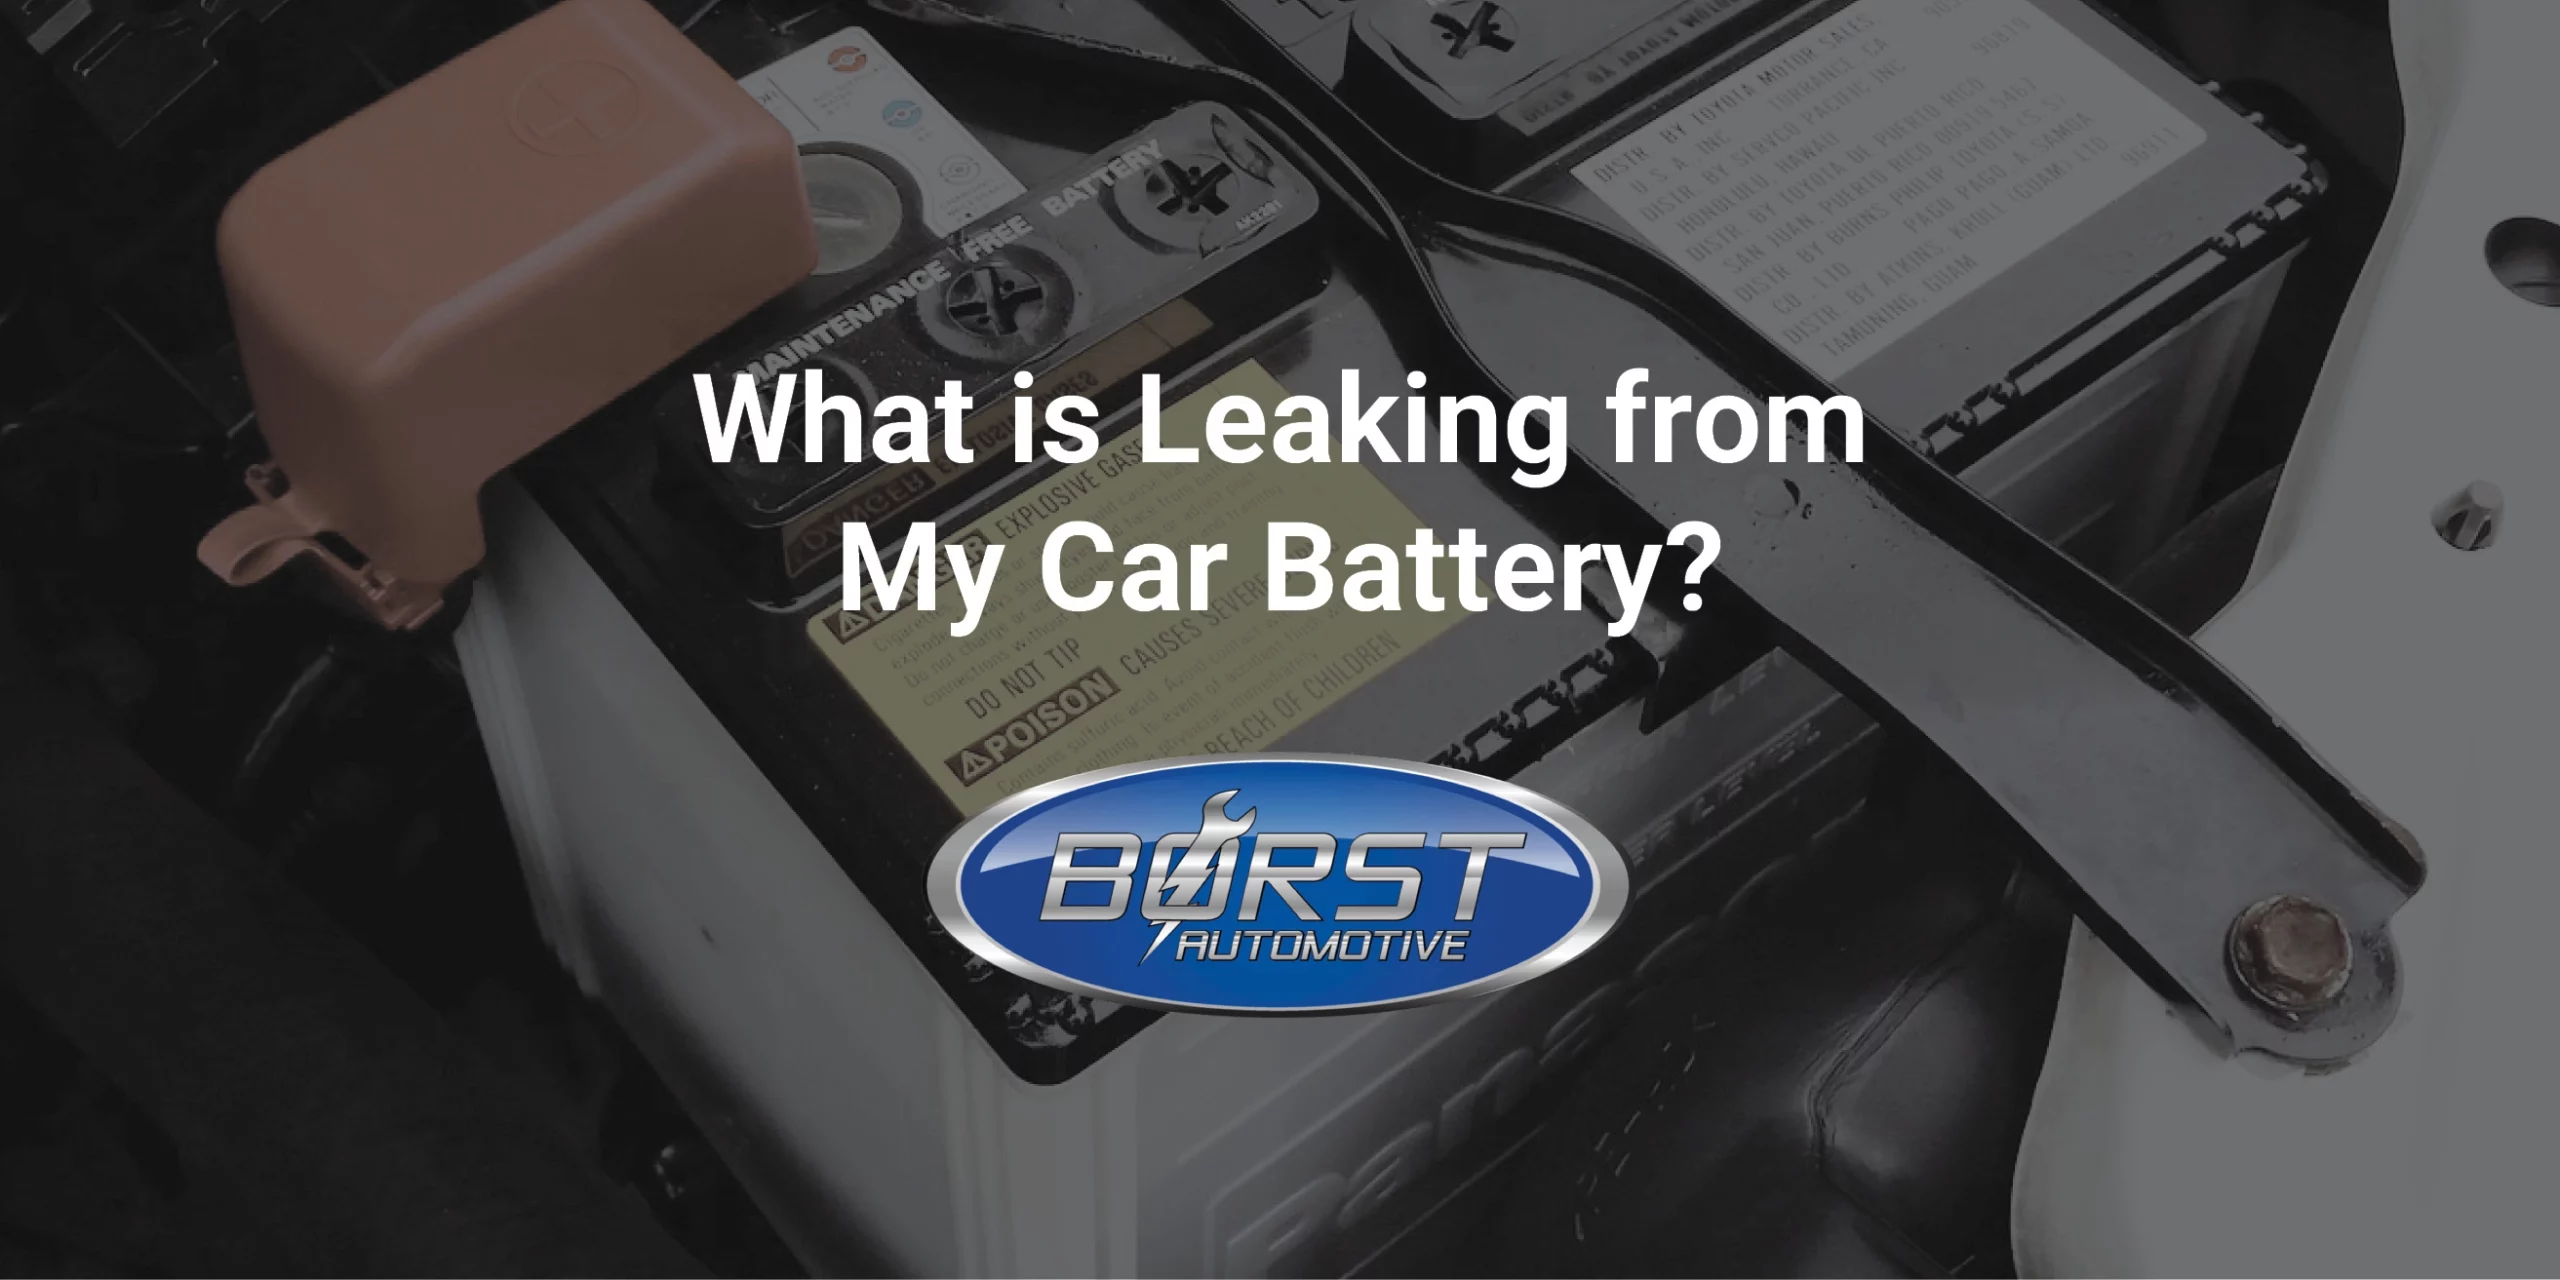 What is Leaking from My Car Battery?